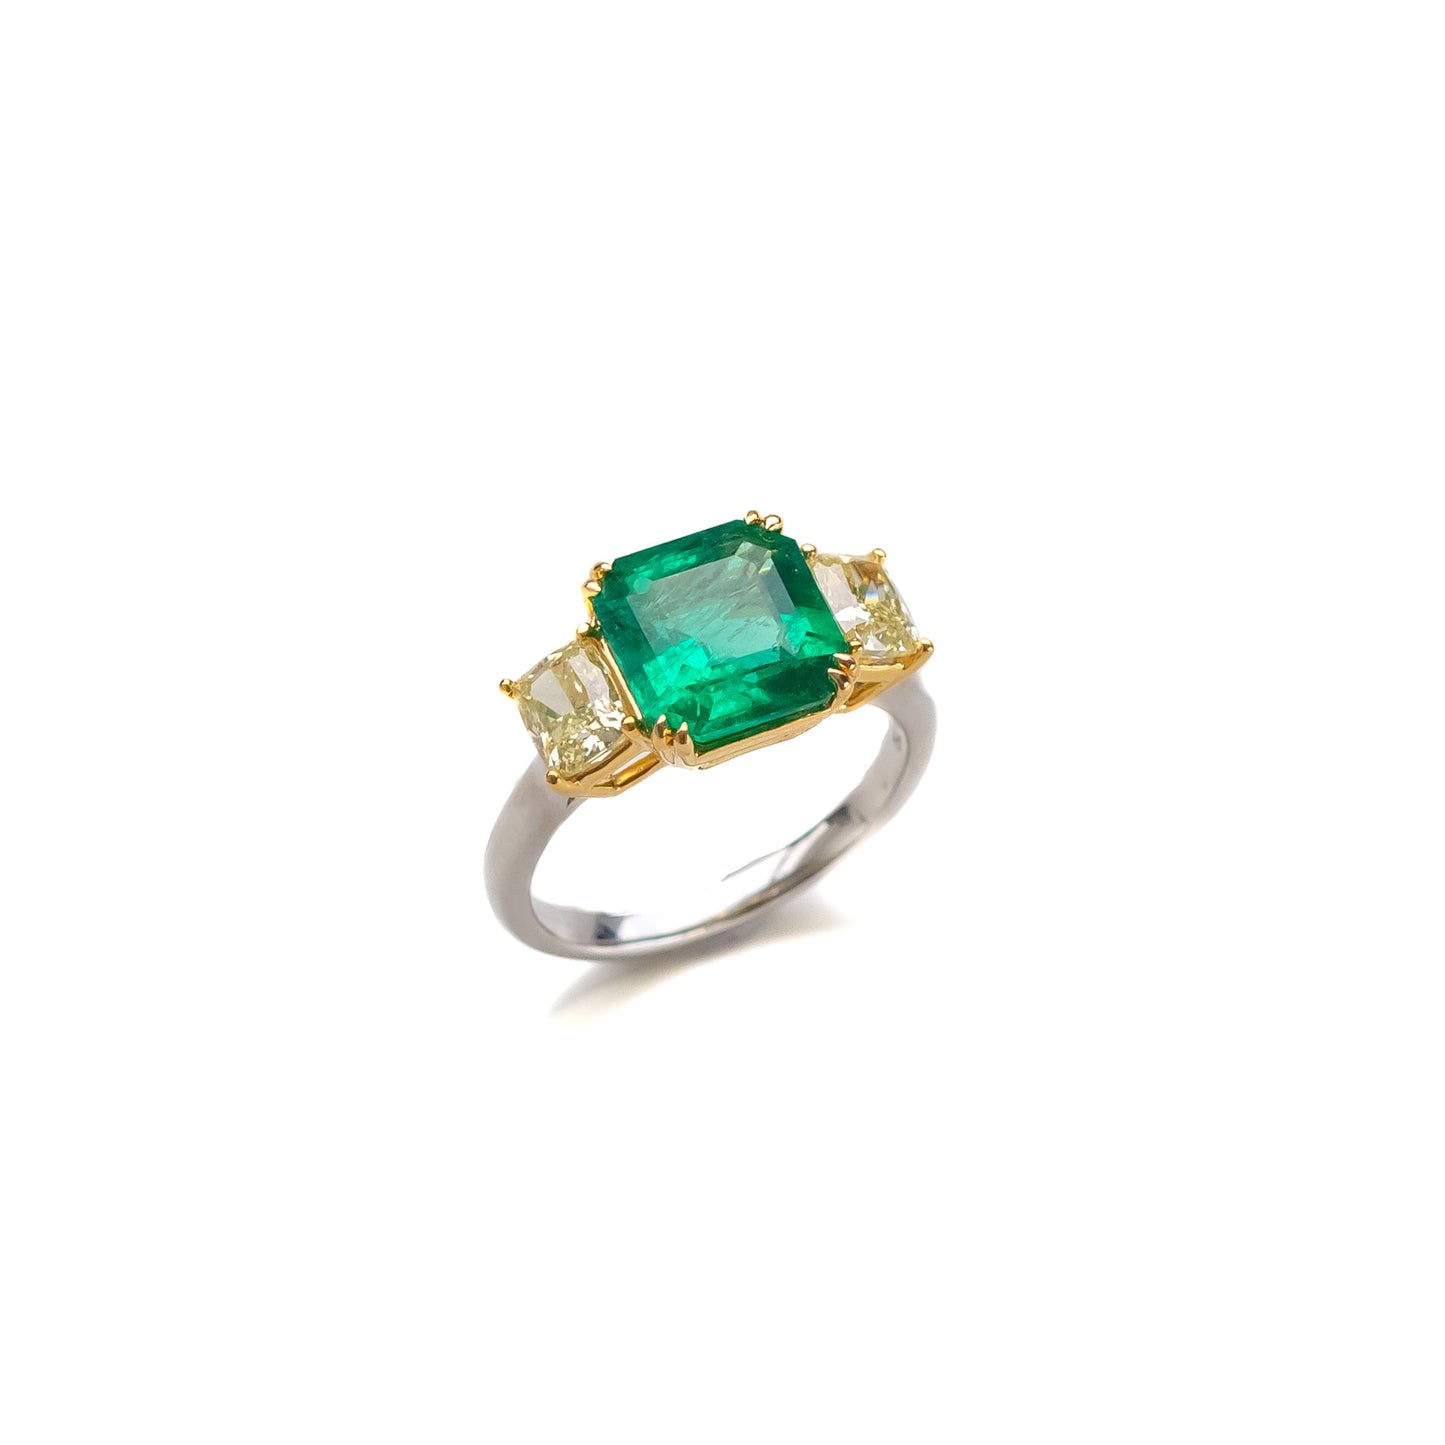 emerald and diamond ring, emerald engagement ring, emerald ring, diamond band, diamond ring, hong kong engagement ring, zambian emerald, cocktail ring, delicate emerald ring, colombian emerald ring, hong kong engagement ring, 翡翠戒指, 祖母绿戒指, 香港珠宝, 订婚戒指, 钻戒, 钻石, 古董钻石, emerald and yellow diamond ring, yellow diamonds, yellow diamond, colour diamond, muzo emerald